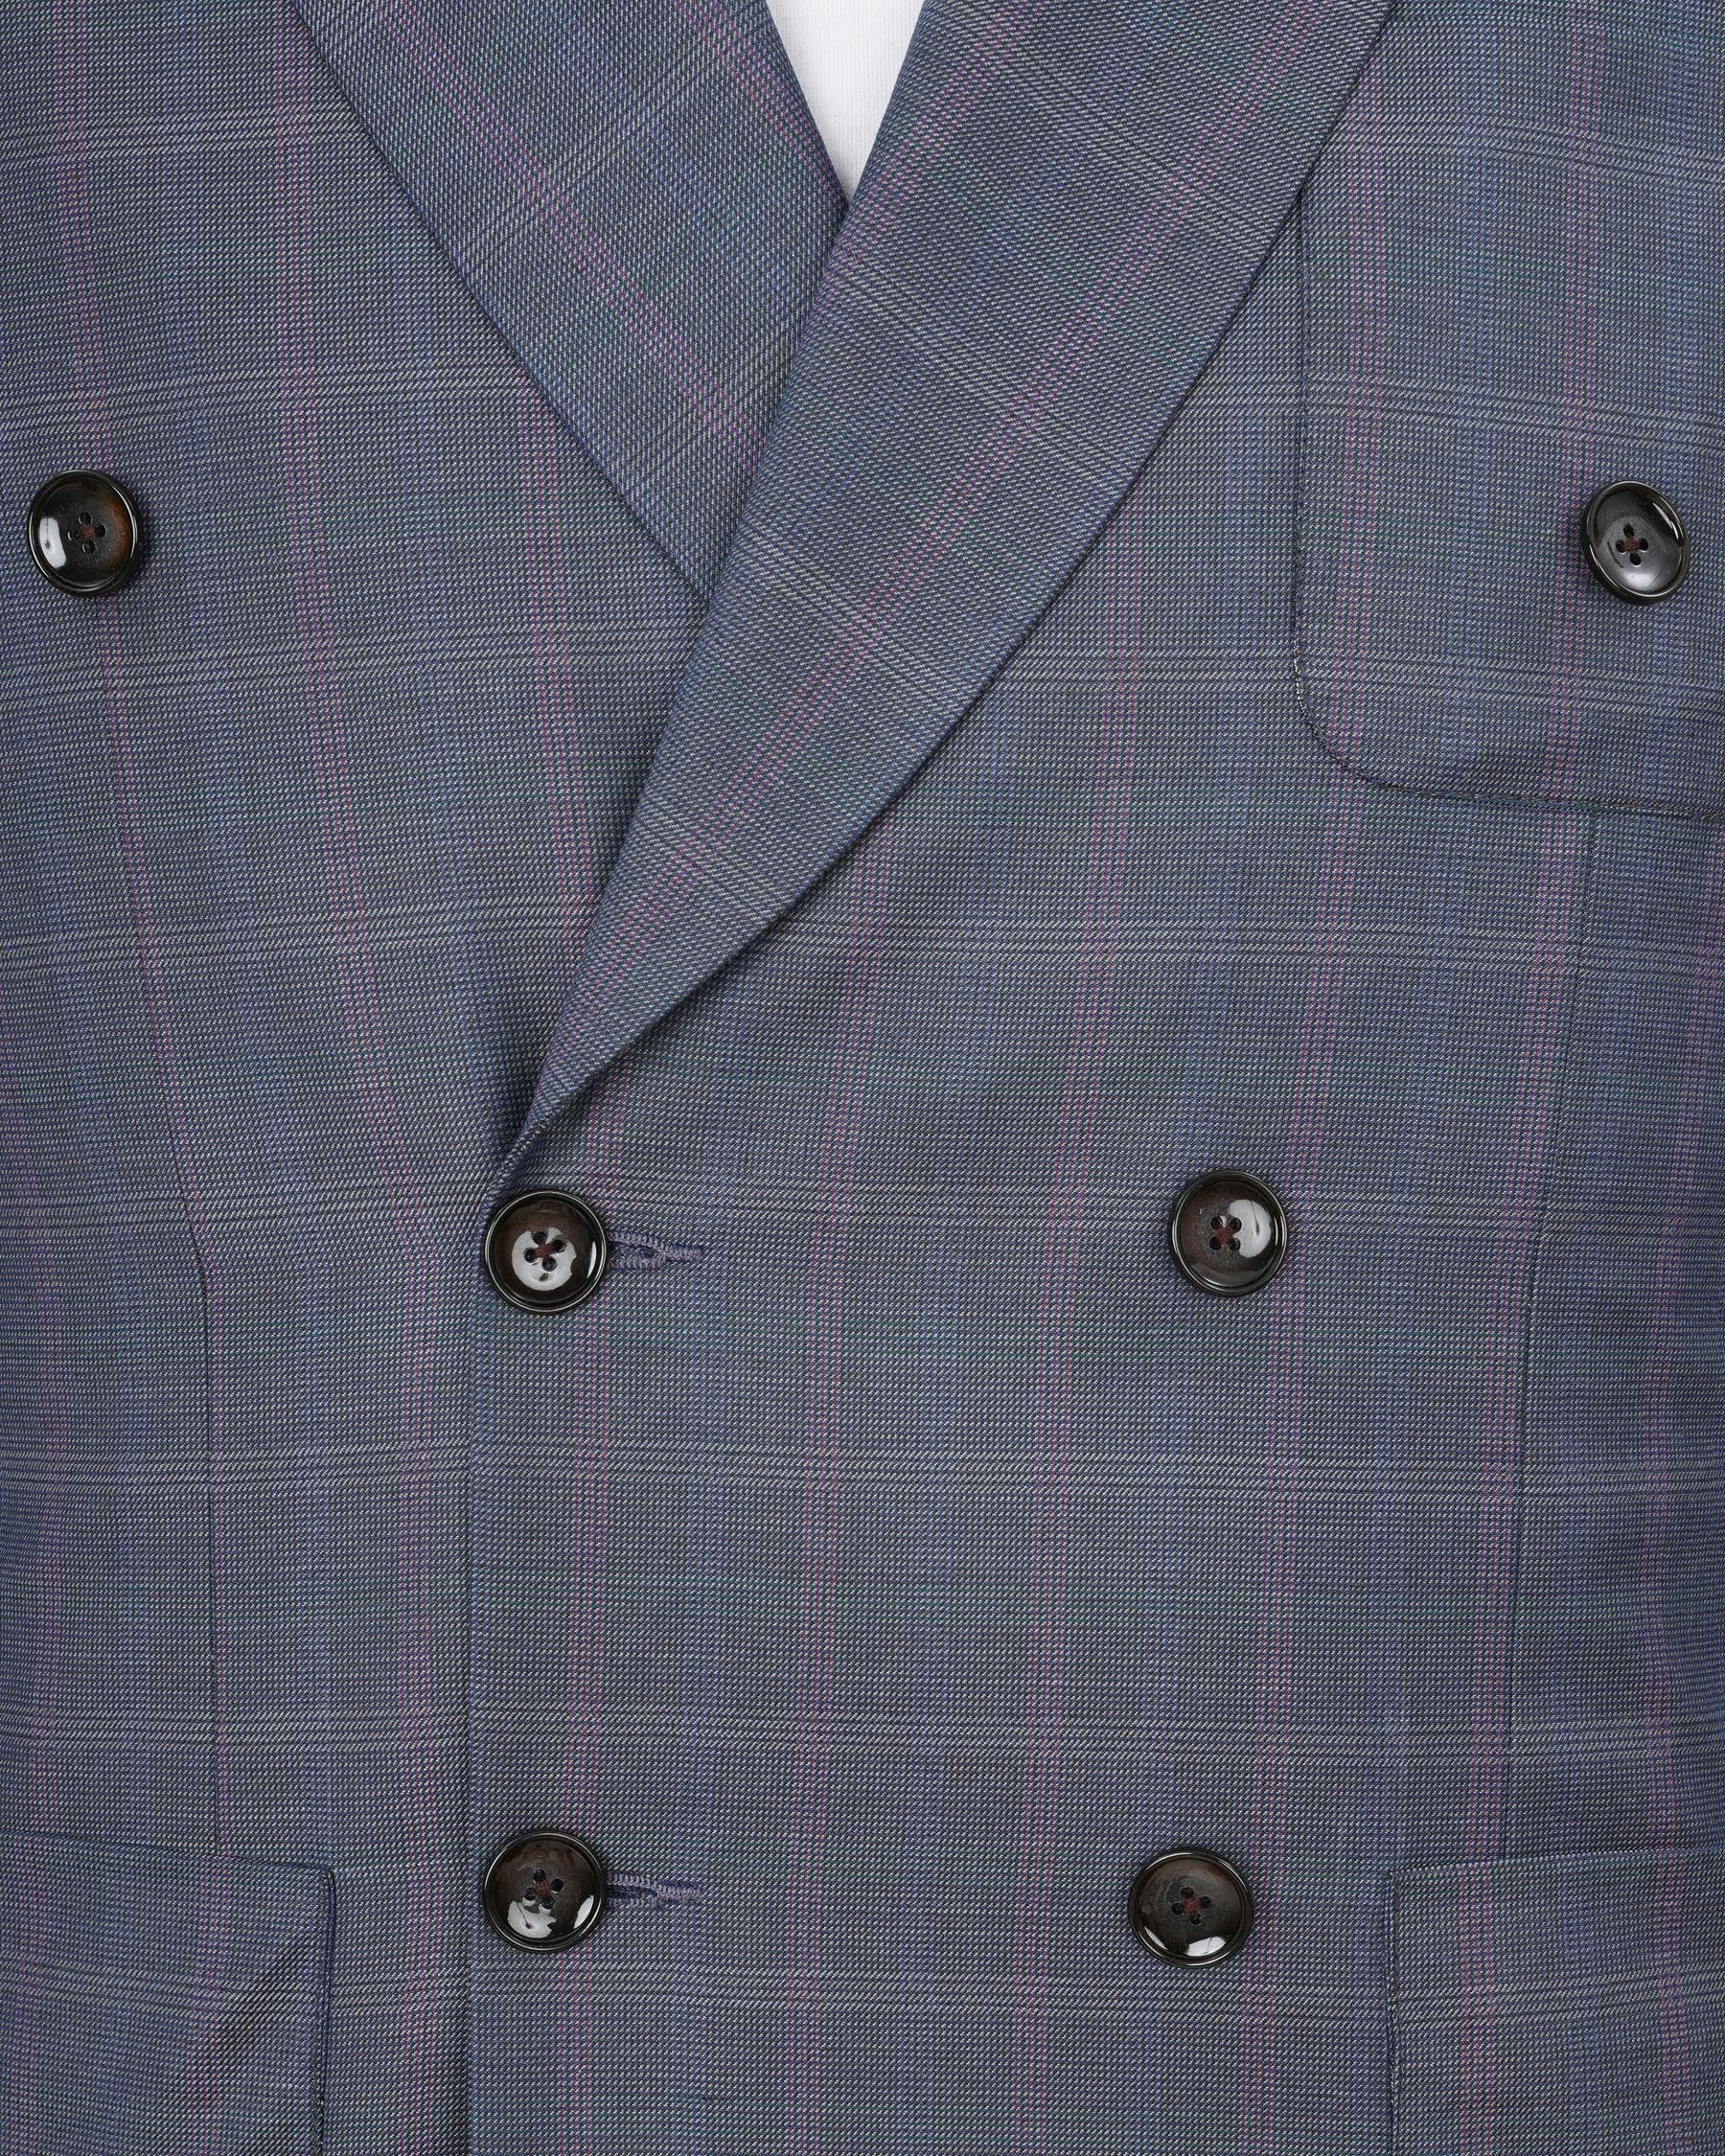 Storm Dust Plaid Double Breasted Sports Blazer BL1889-DB-PP-36,BL1889-DB-PP-38,BL1889-DB-PP-40,BL1889-DB-PP-42,BL1889-DB-PP-44,BL1889-DB-PP-46,BL1889-DB-PP-48,BL1889-DB-PP-50,BL1889-DB-PP-52,BL1889-DB-PP-54,BL1889-DB-PP-56,BL1889-DB-PP-58,BL1889-DB-PP-60